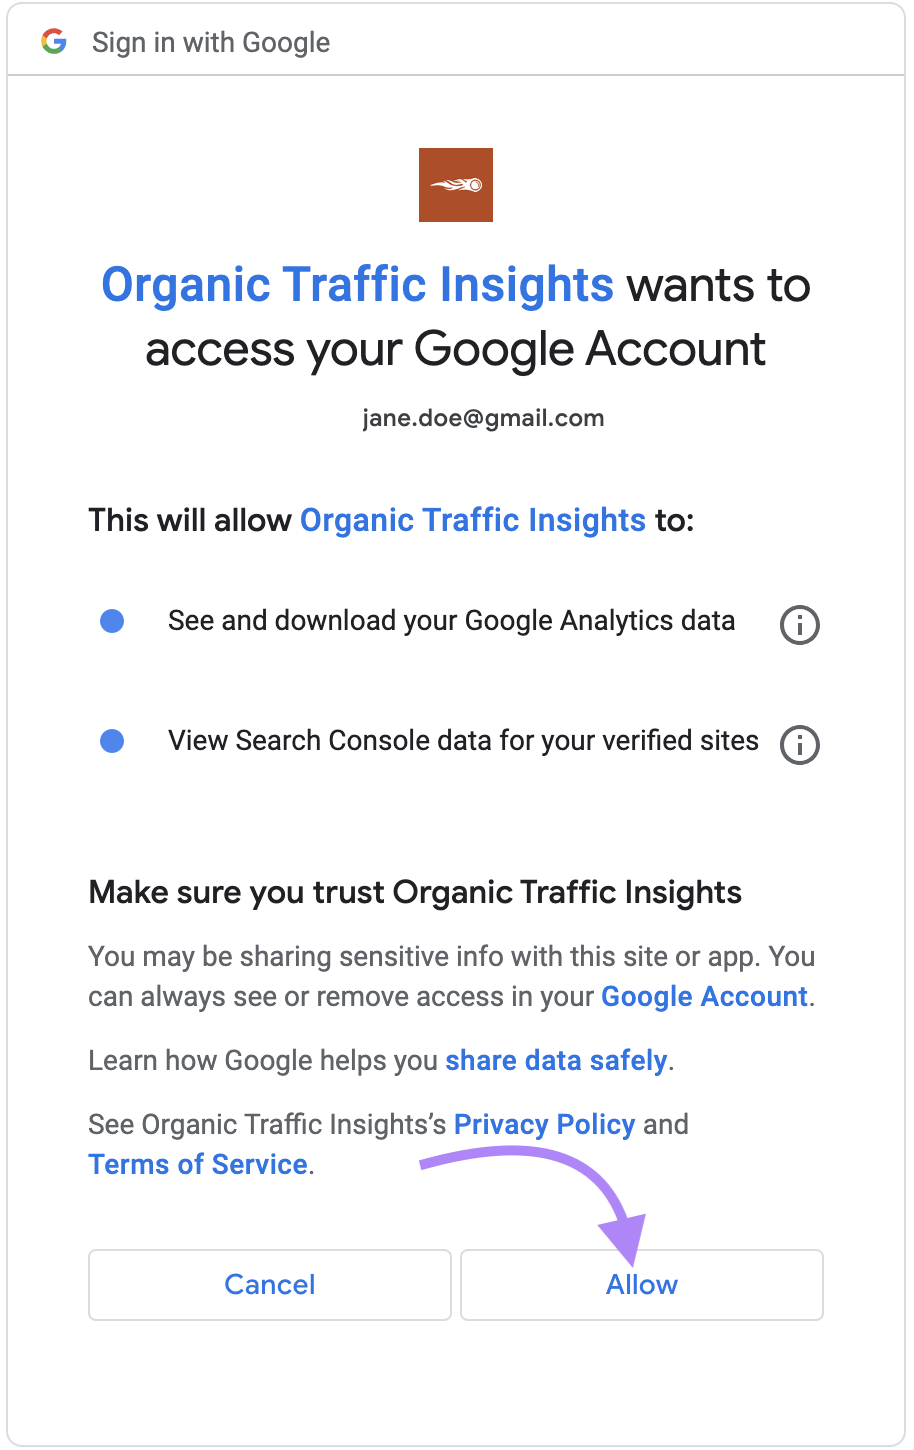 "Allow" button highlighted under "Organic Traffic Insights wants to access your Google Account" screen